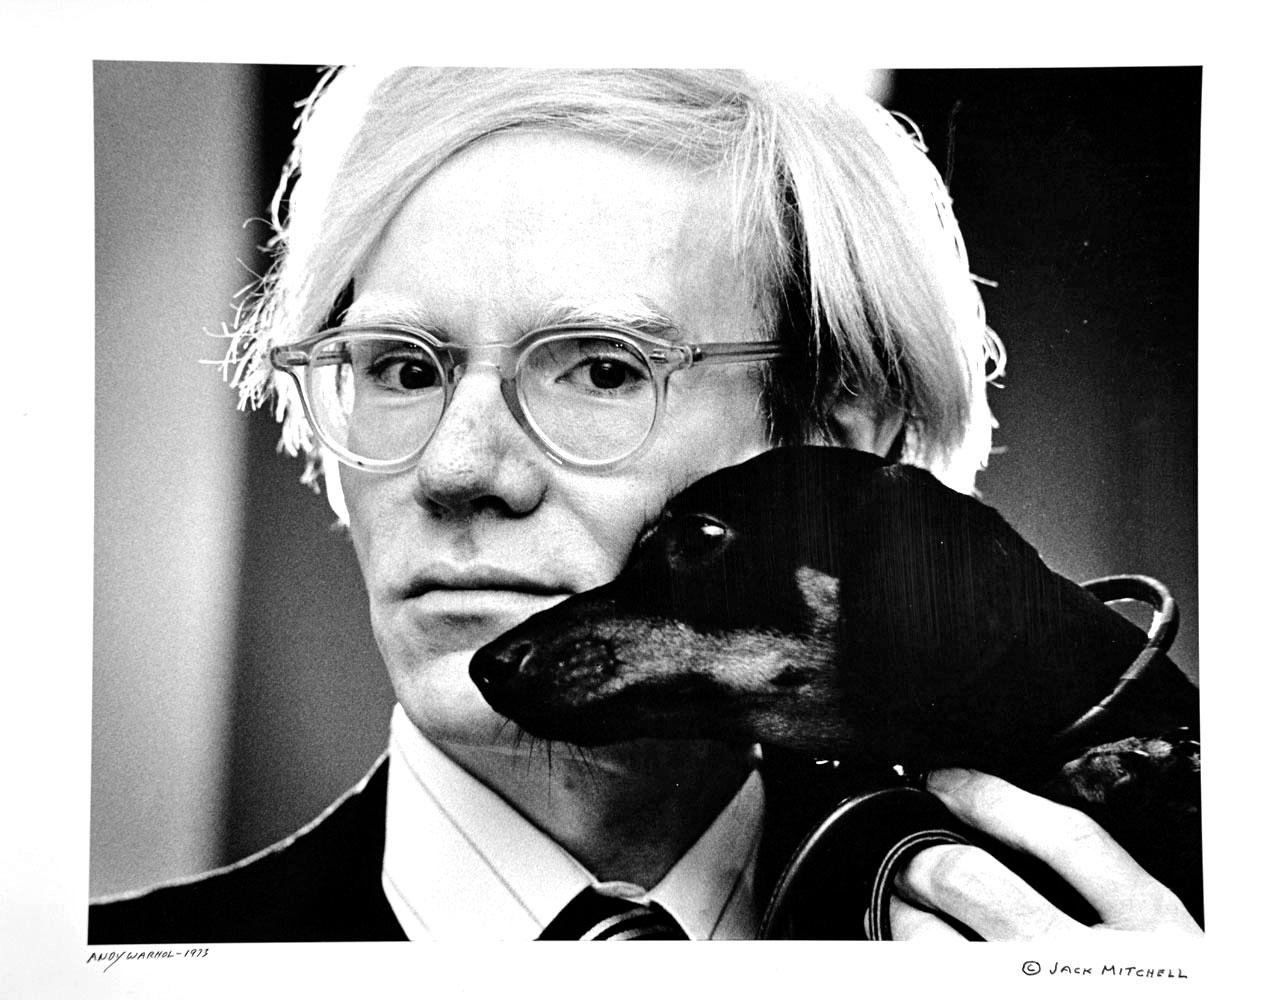 Jack Mitchell Portrait Photograph - Andy Warhol and Archie